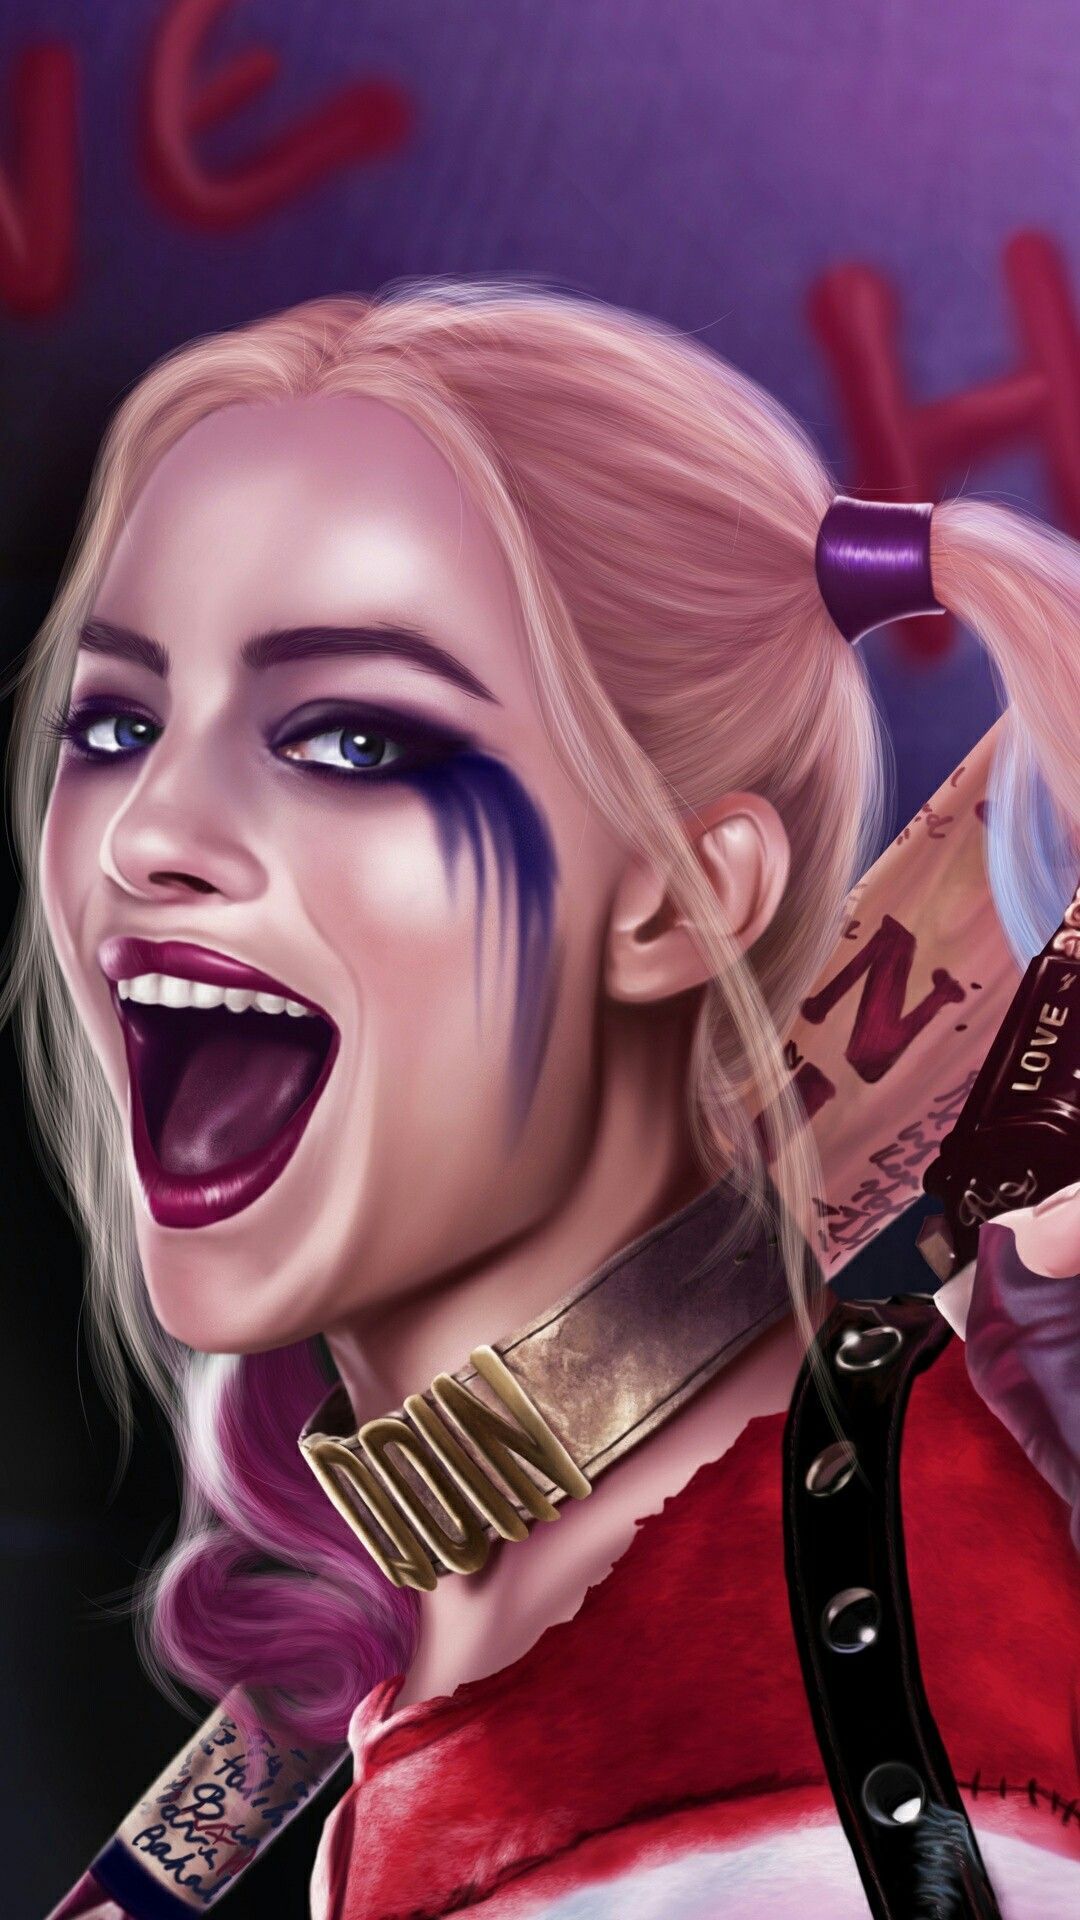 Read Wallpapers From The Story Fotos Para Tela Do Seu - Harley Quinn , HD Wallpaper & Backgrounds